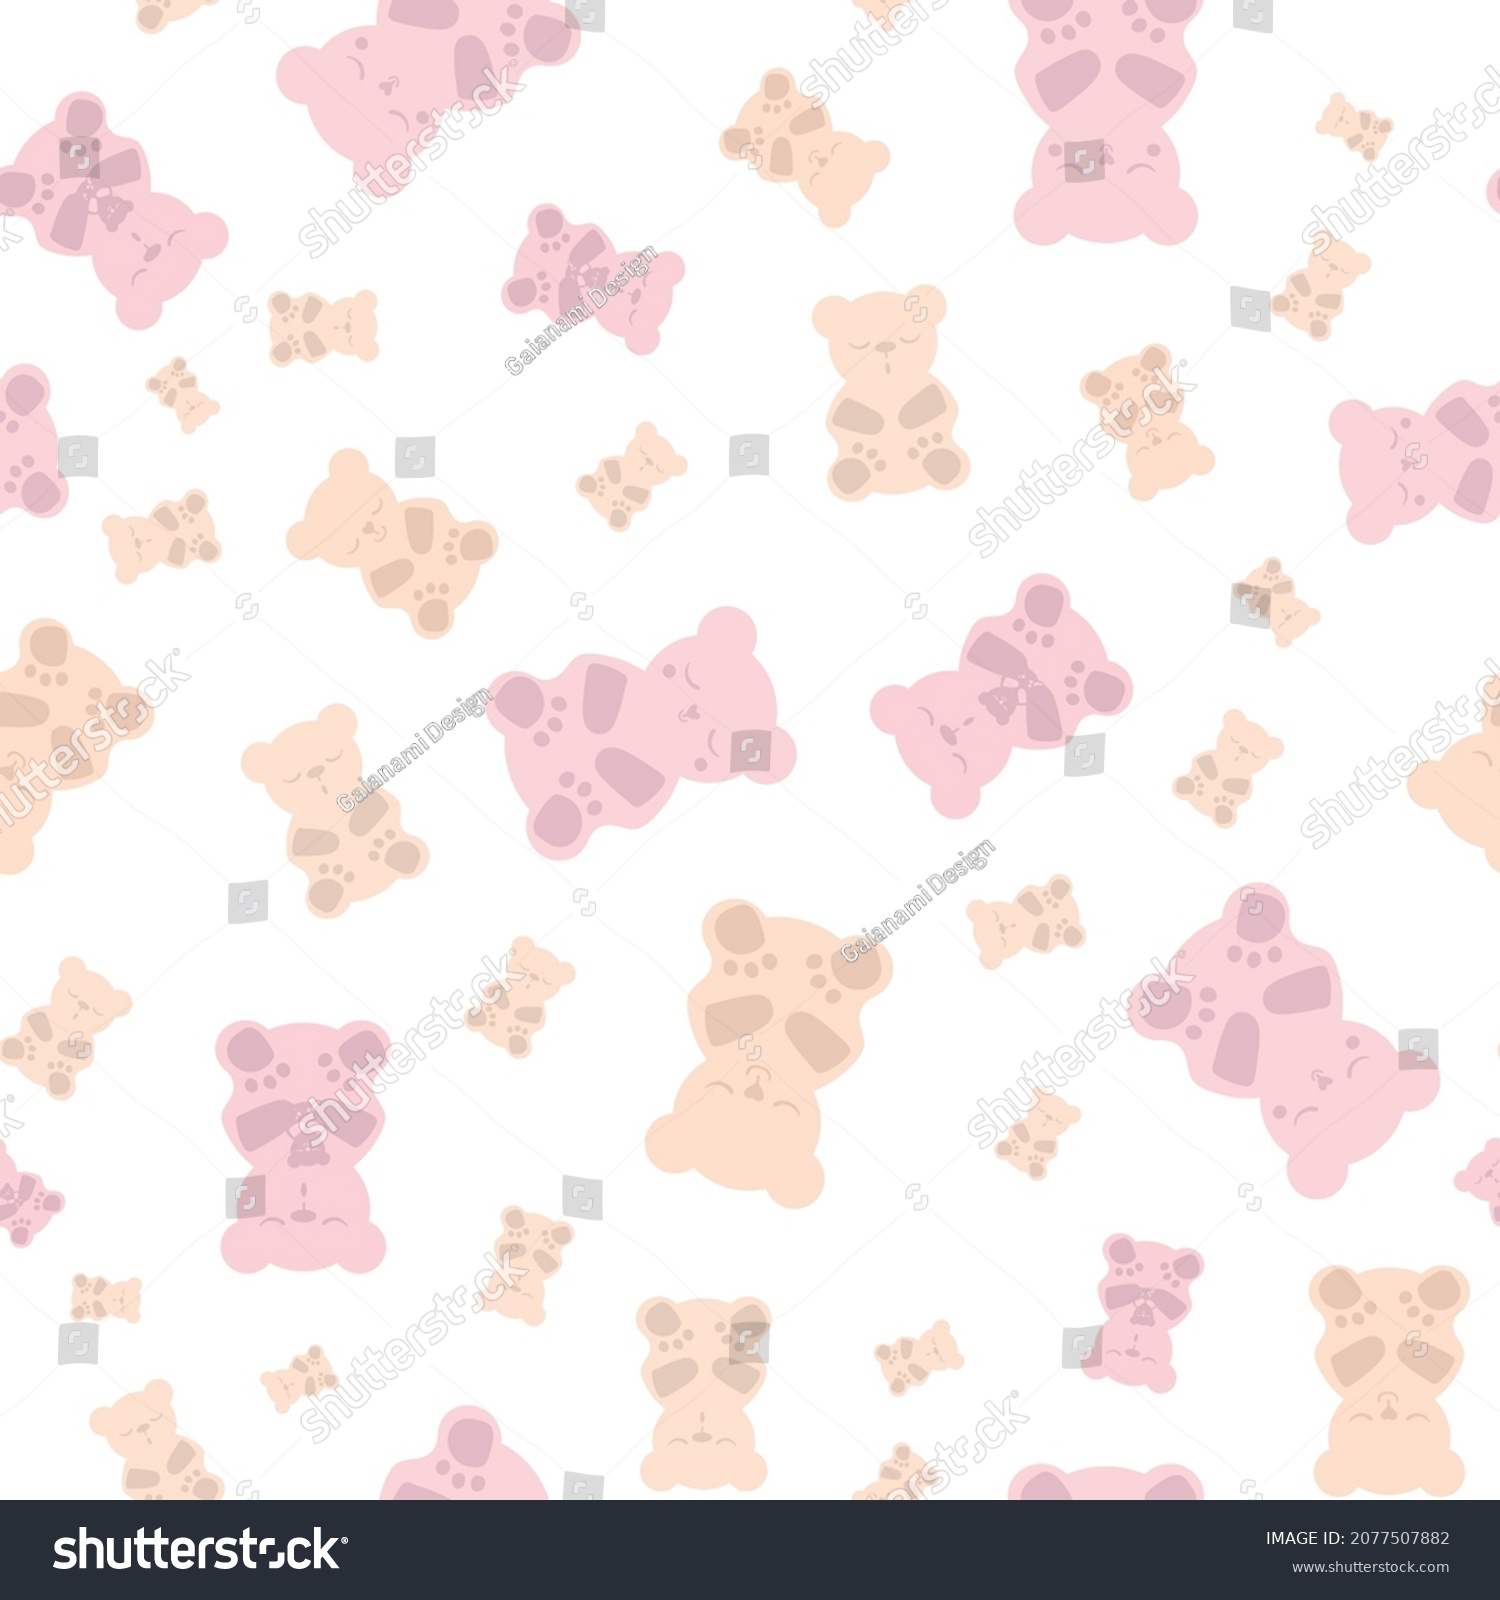 SVG of Sleep gummies vector seamless pattern background. Backdrop with gummy bears in pastel pink yellow white. Cute kawaii style characters for sleeping well, melatonin natural aid and health concept. svg